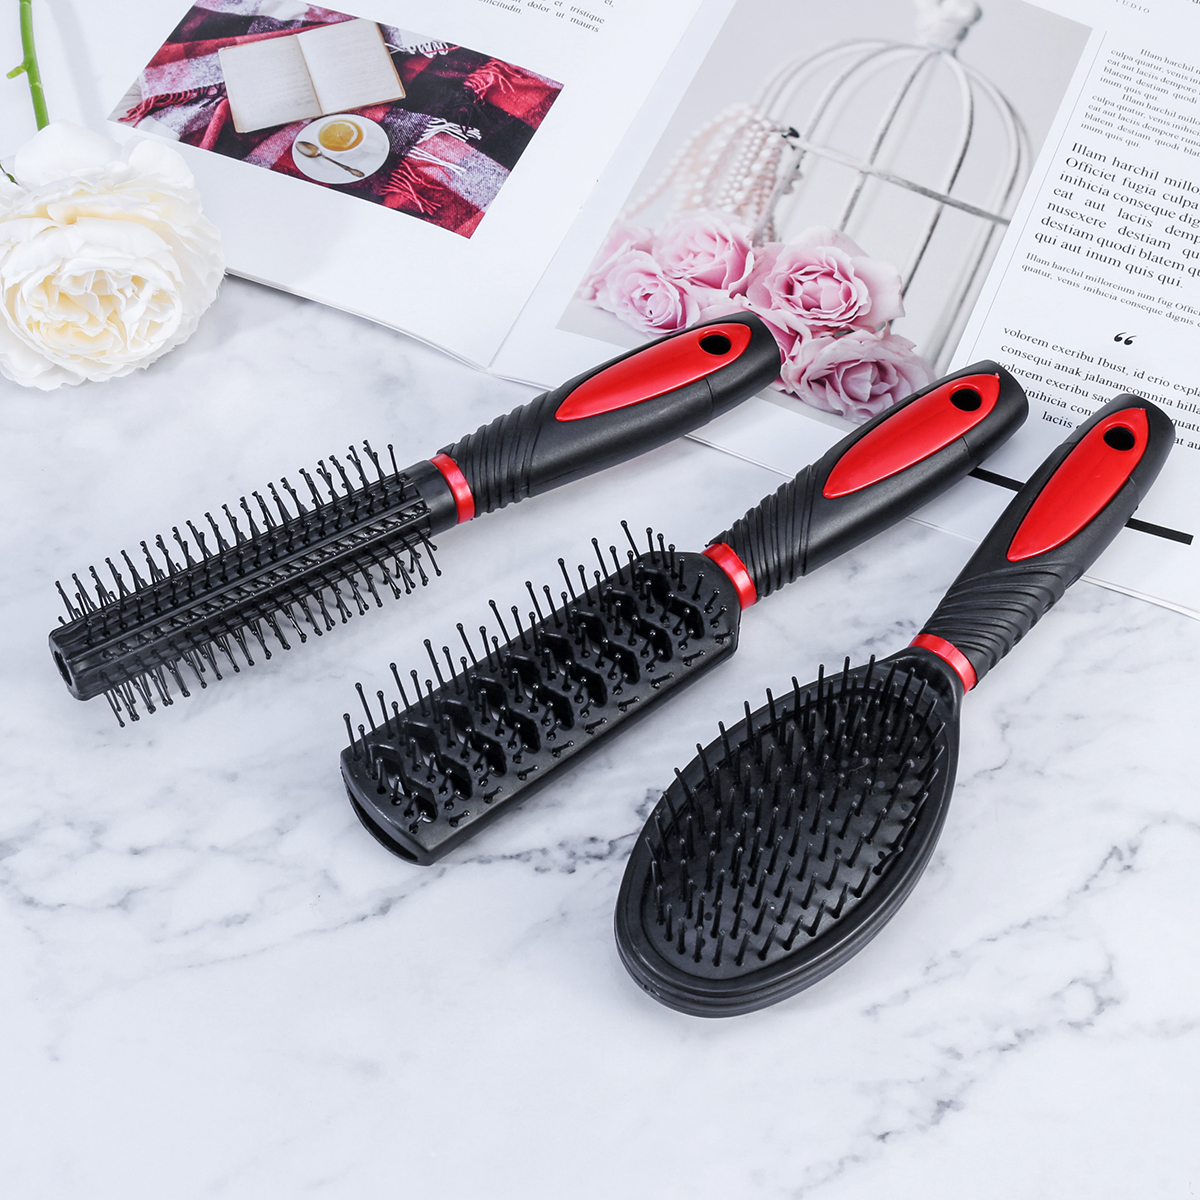 Healthcom Set of 5 Hair Combs Set Professional Salon Hair Cutting Brushes Sets Salon Hairdressing Styling Tool Mirror And Holder Stand Set Dressing Comb Kits for Women and Men